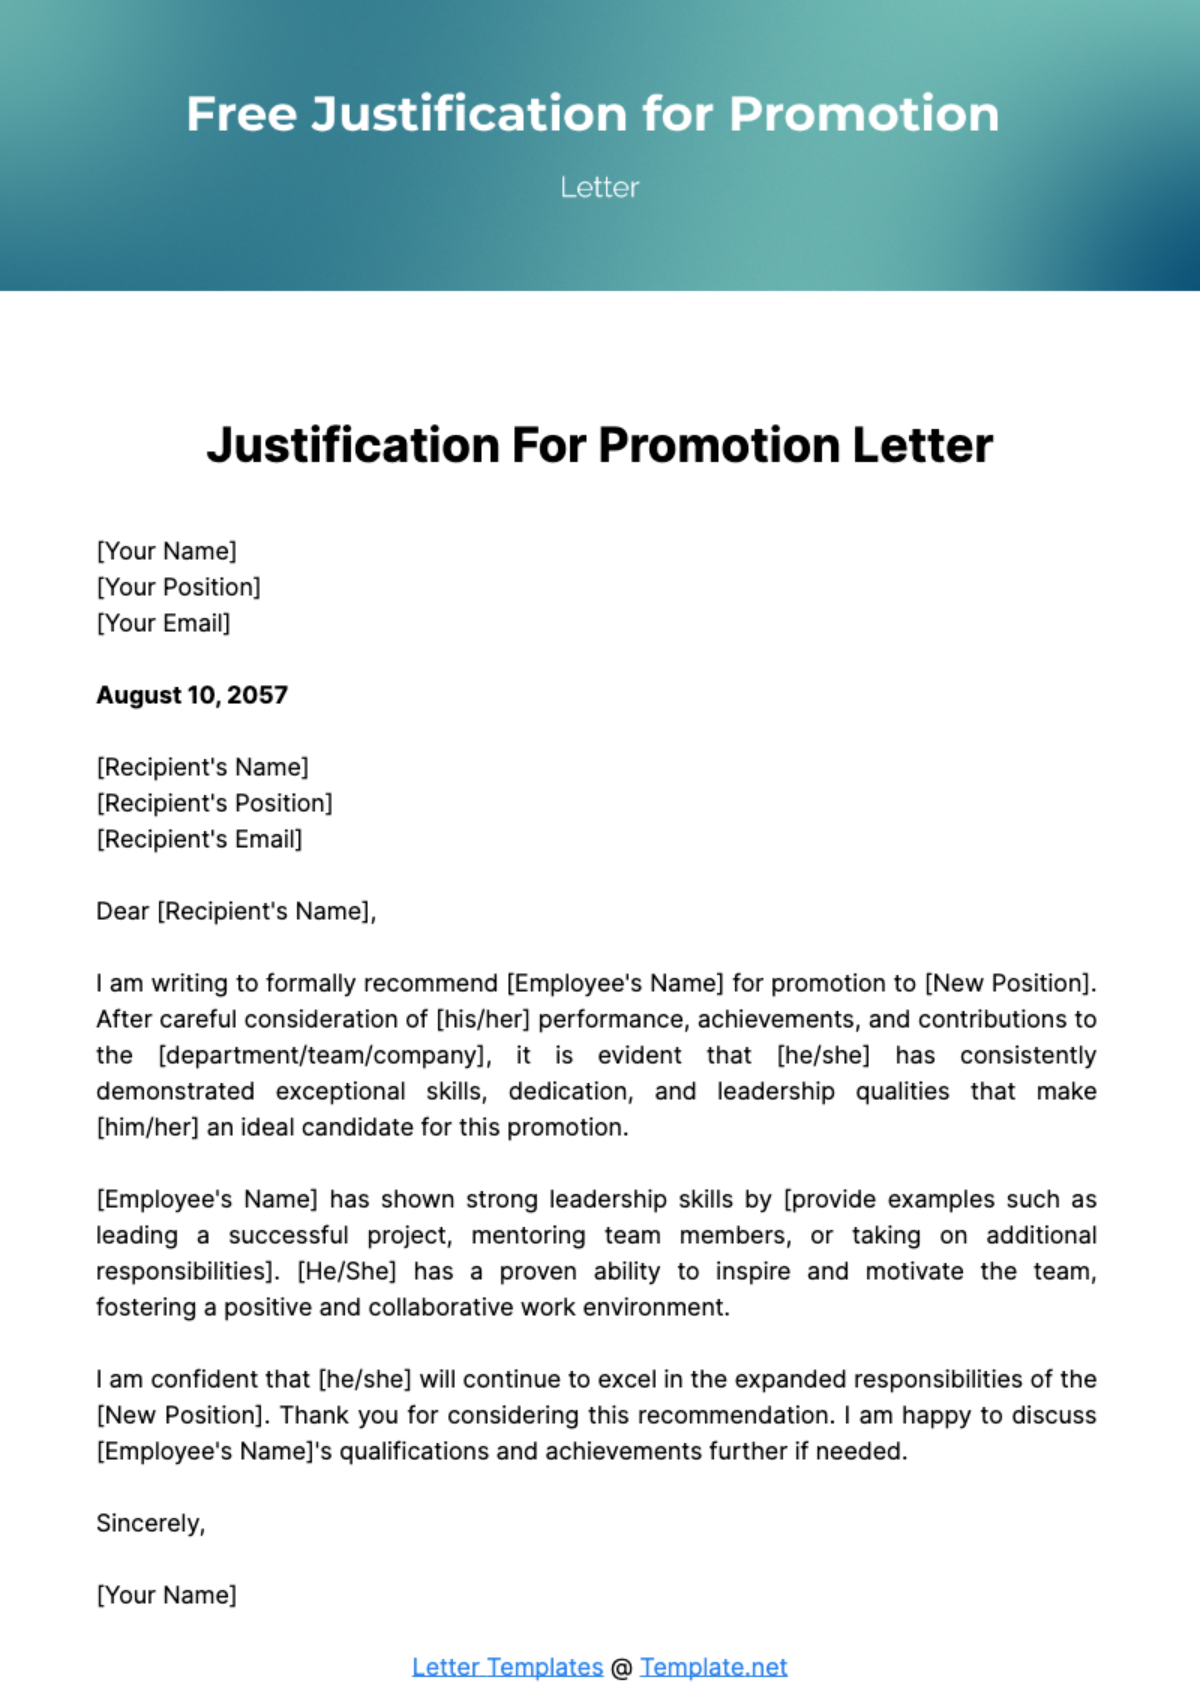 Justification for Promotion Letter Template